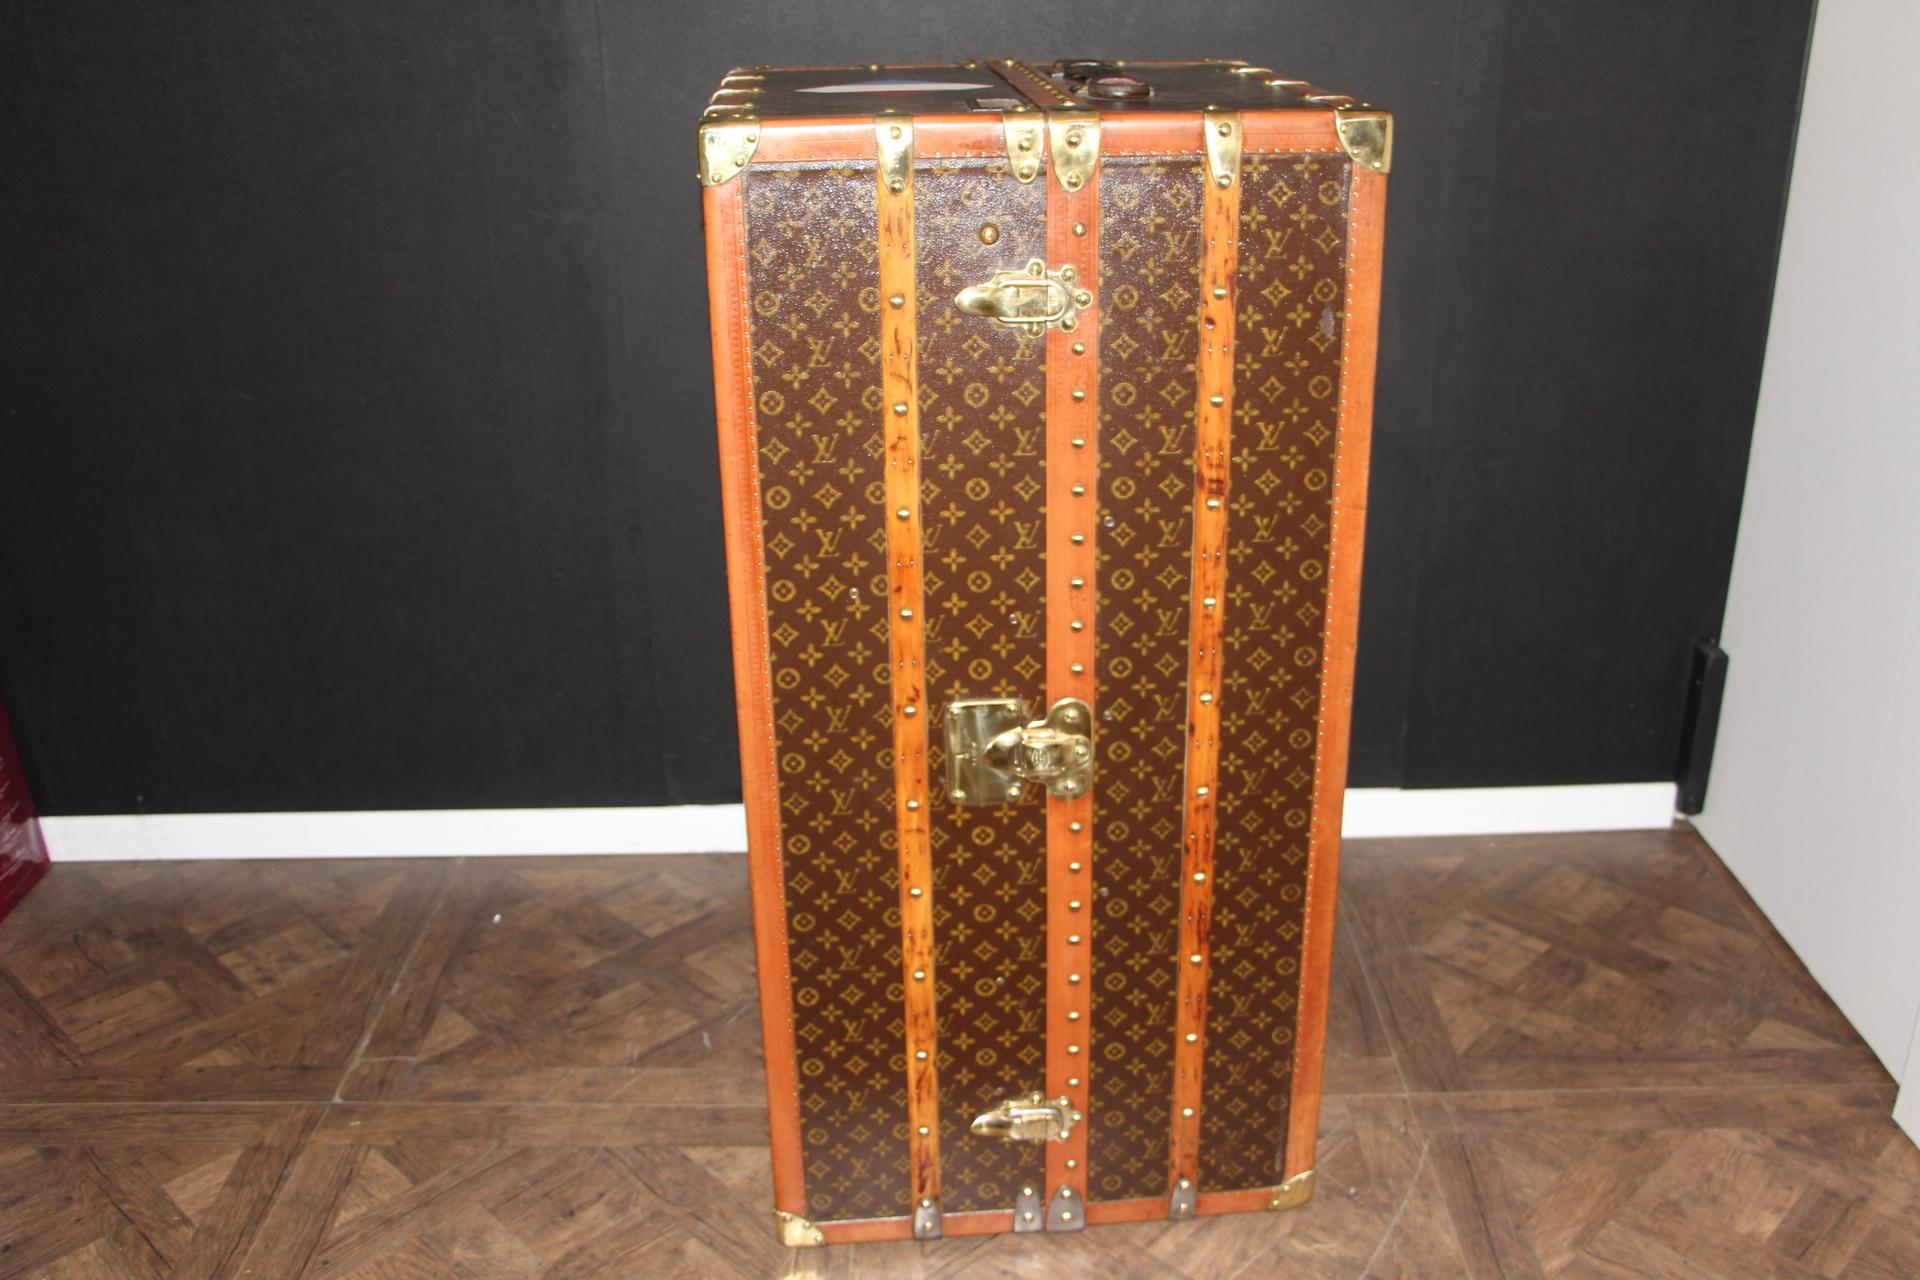 This impressive Louis Vuitton wardrobe features stenciled monogram canvas, lozine trims and solid brass locks.
Locks and studs are all marked Louis Vuitton. Customised painted french flag on the top.
Its interior is complete with a lot of original